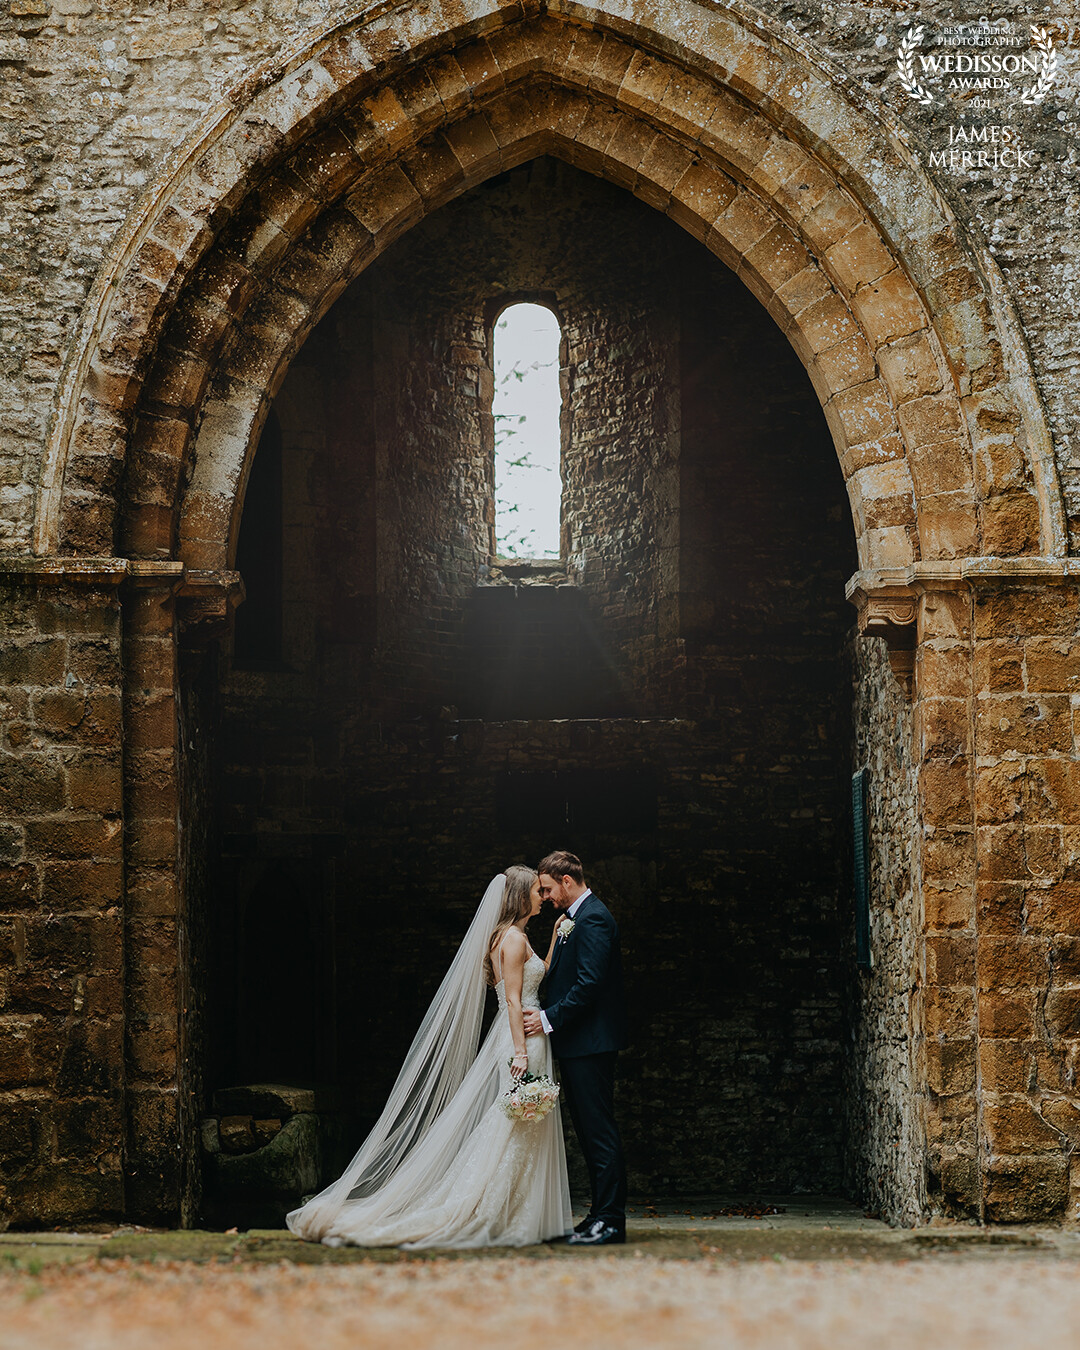 Taken at Ettingham Park Hotel in the UK, the venue has the most stunning grounds and old church ruins. This huge open arch way was perfect for a portrait shot.